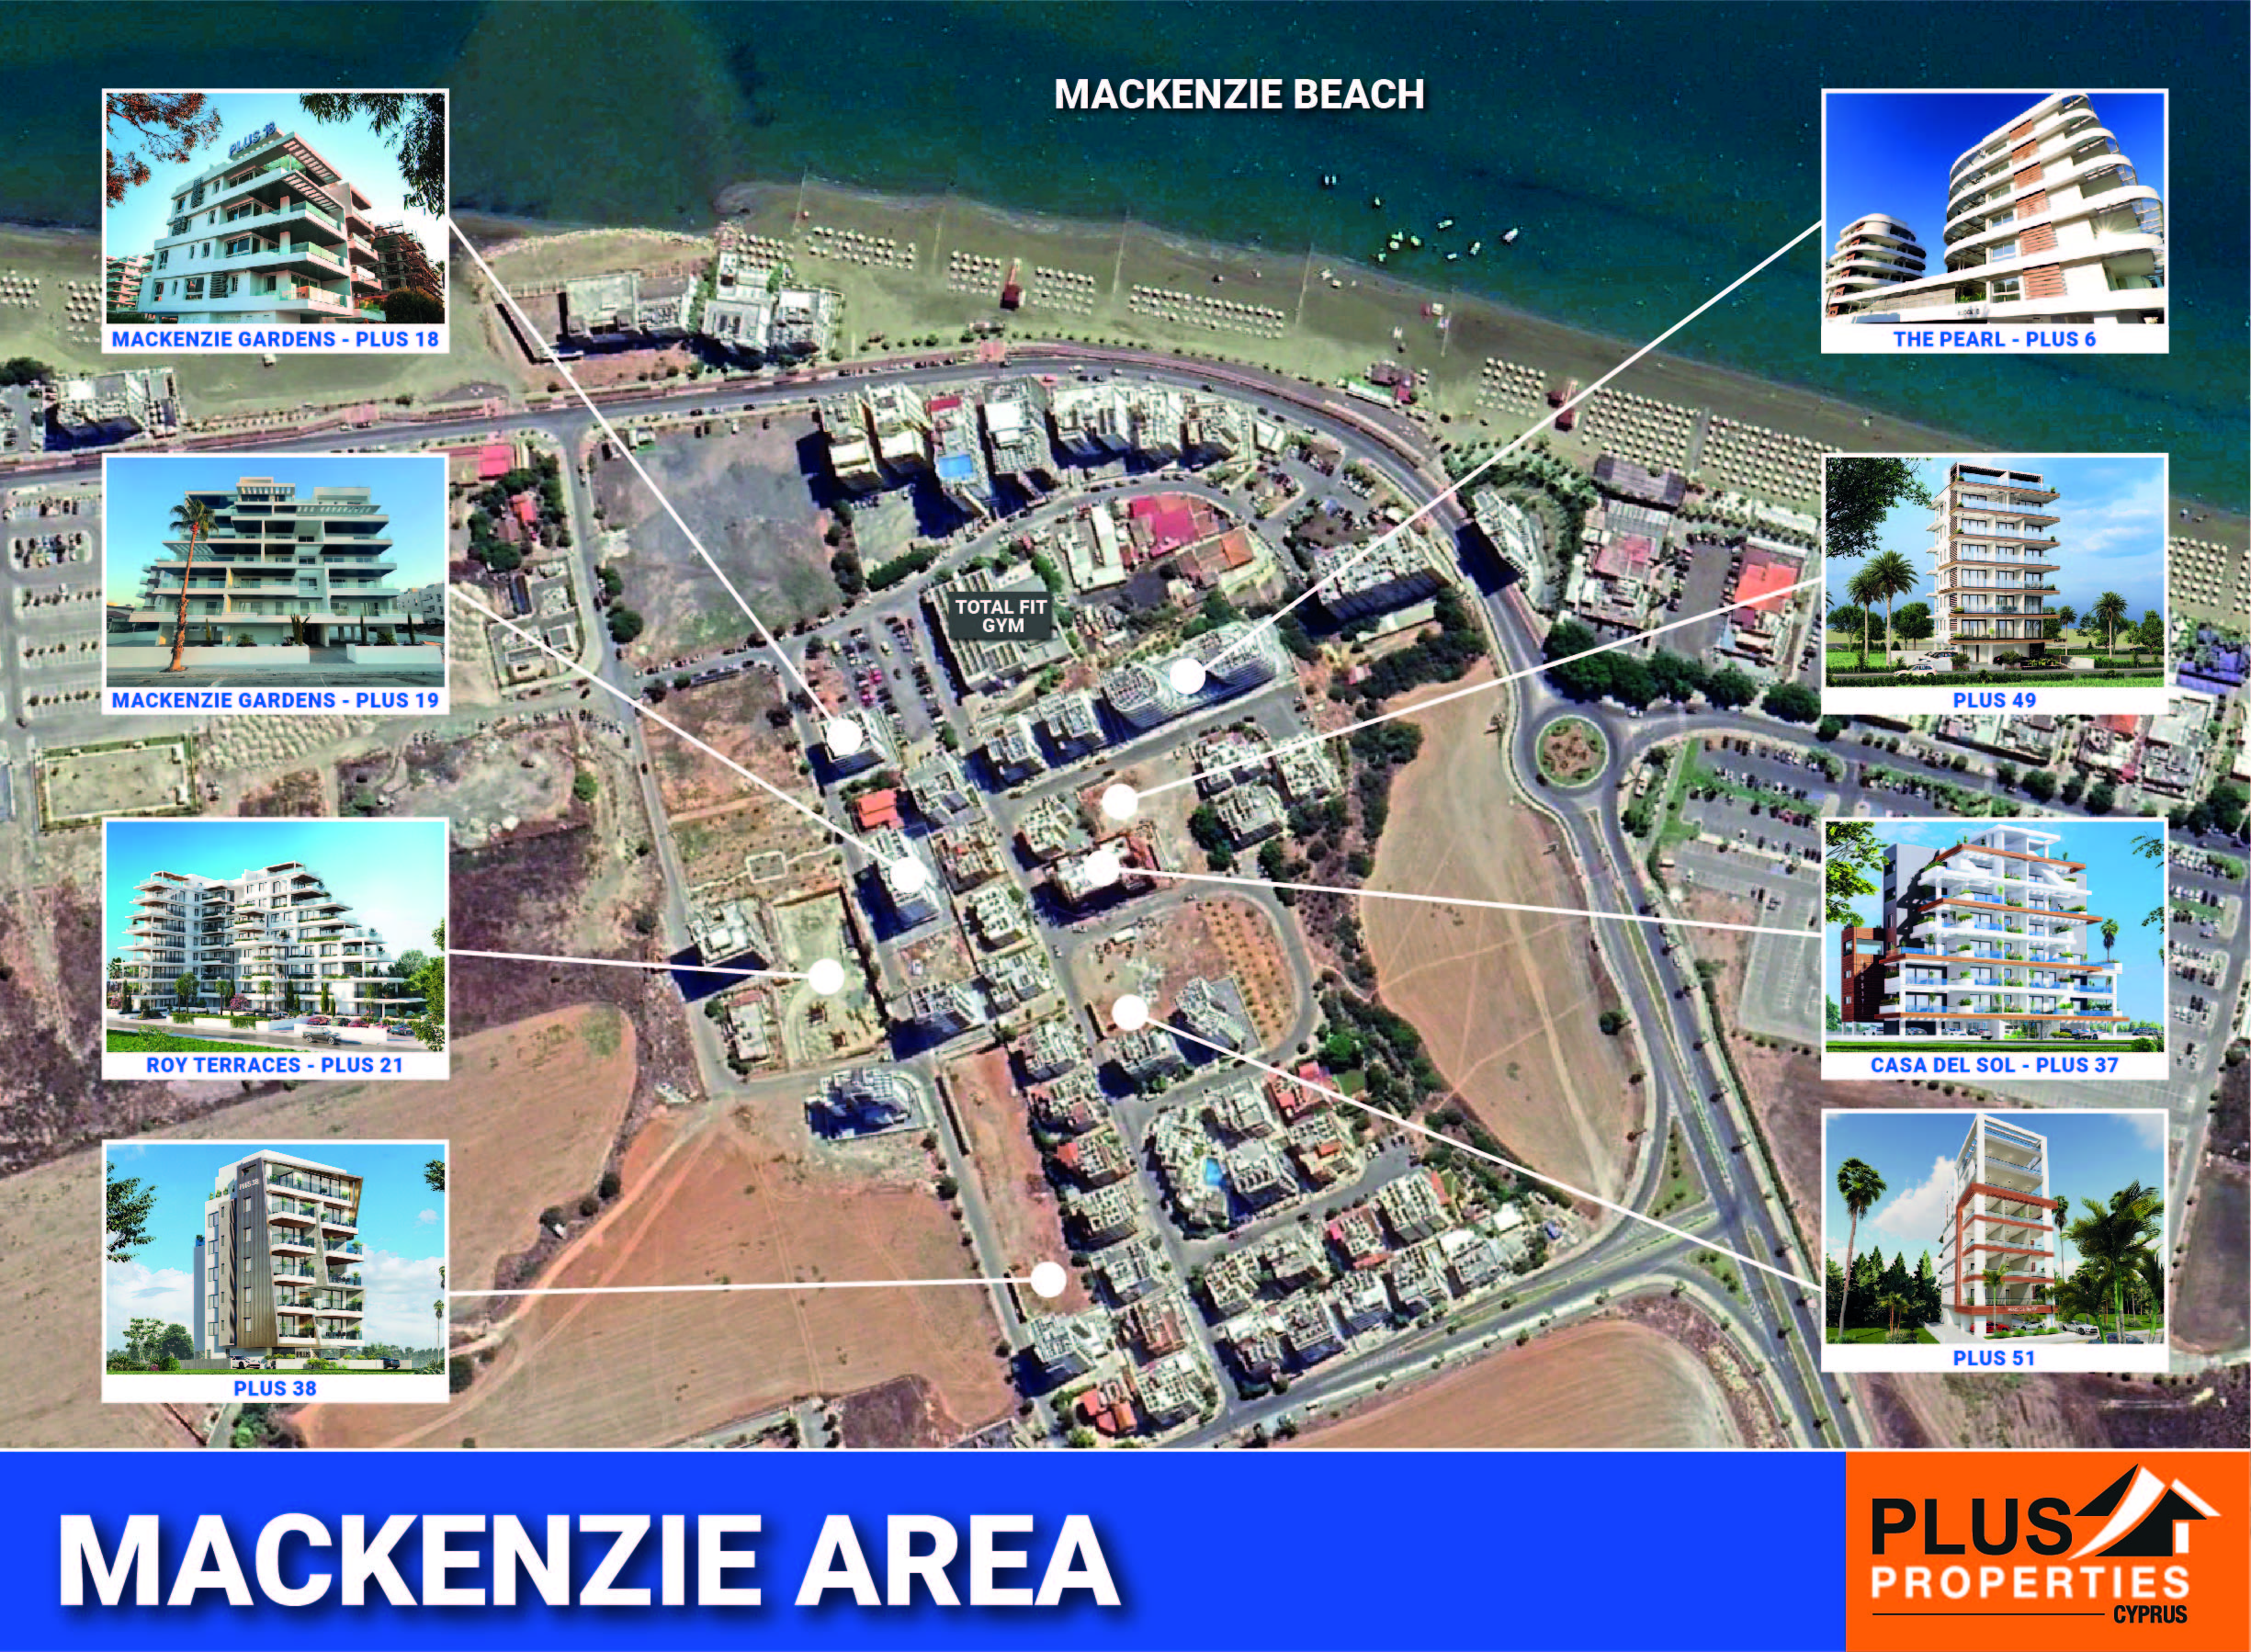 Mackenzie Area will not be the same anymore with Plus Properties!